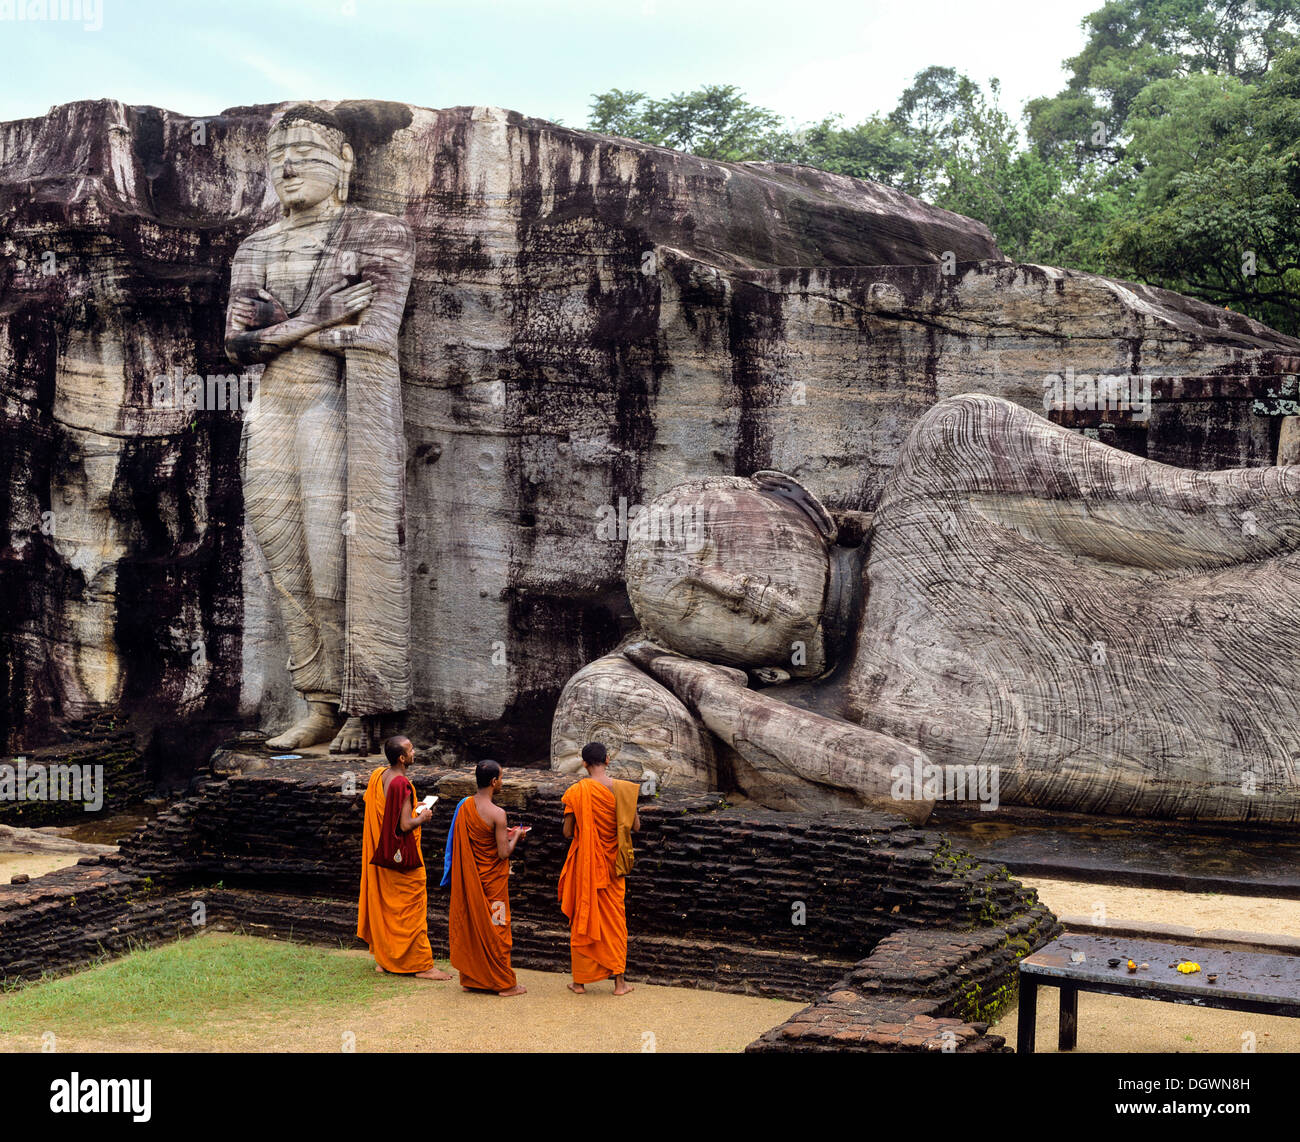 Reclining Buddha, entrance to Nirvana, three monks standing in front of the Gal Vihara rock temple, UNESCO World Heritage Site Stock Photo